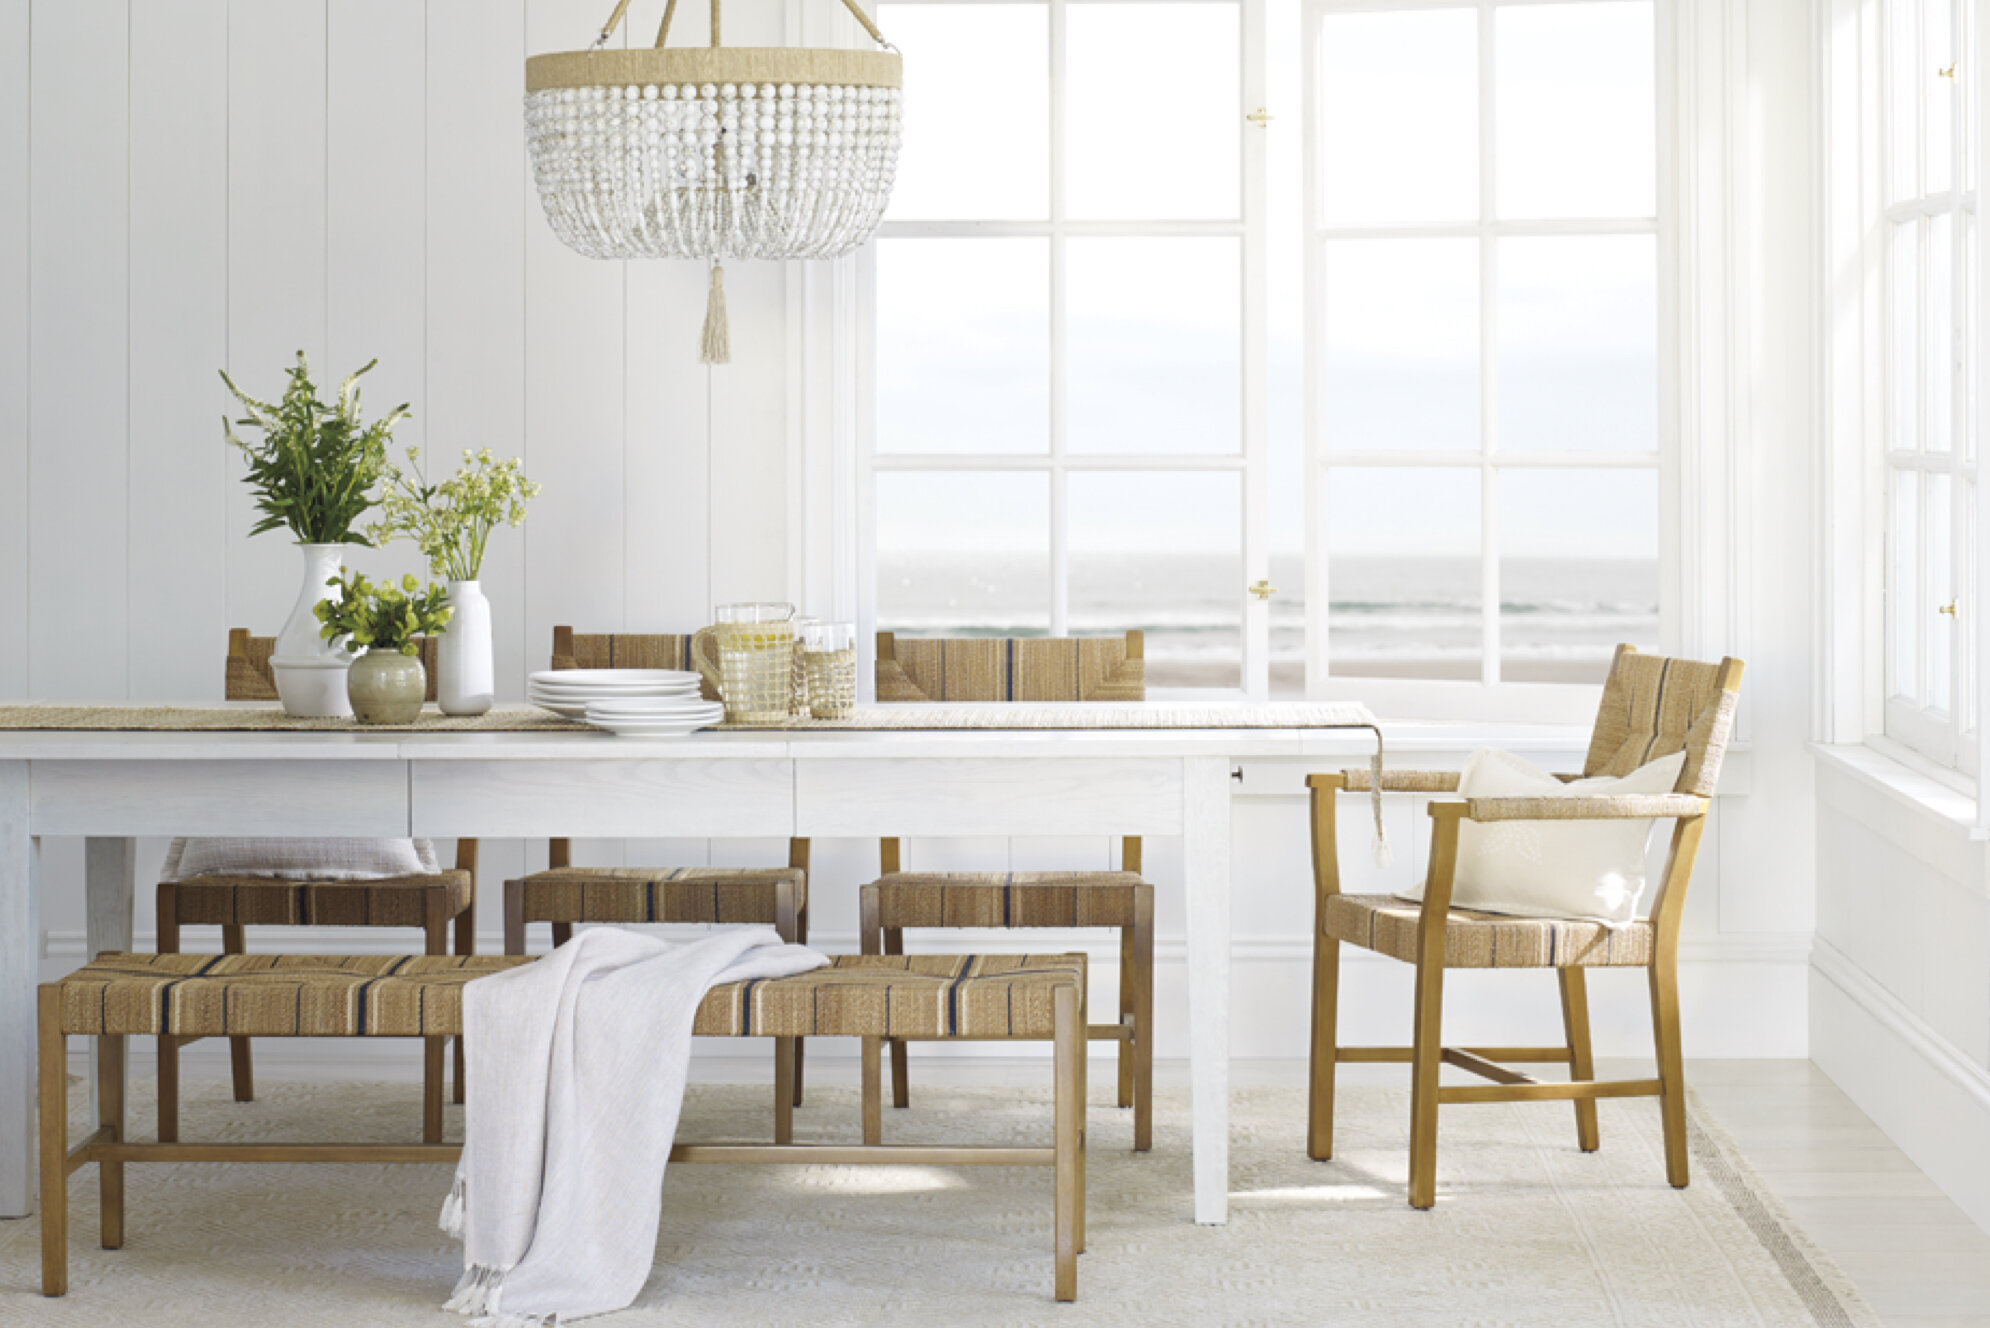 Serena And Lily Dining Room Dupes For Less, Serena And Lily Dining Chair Dupe